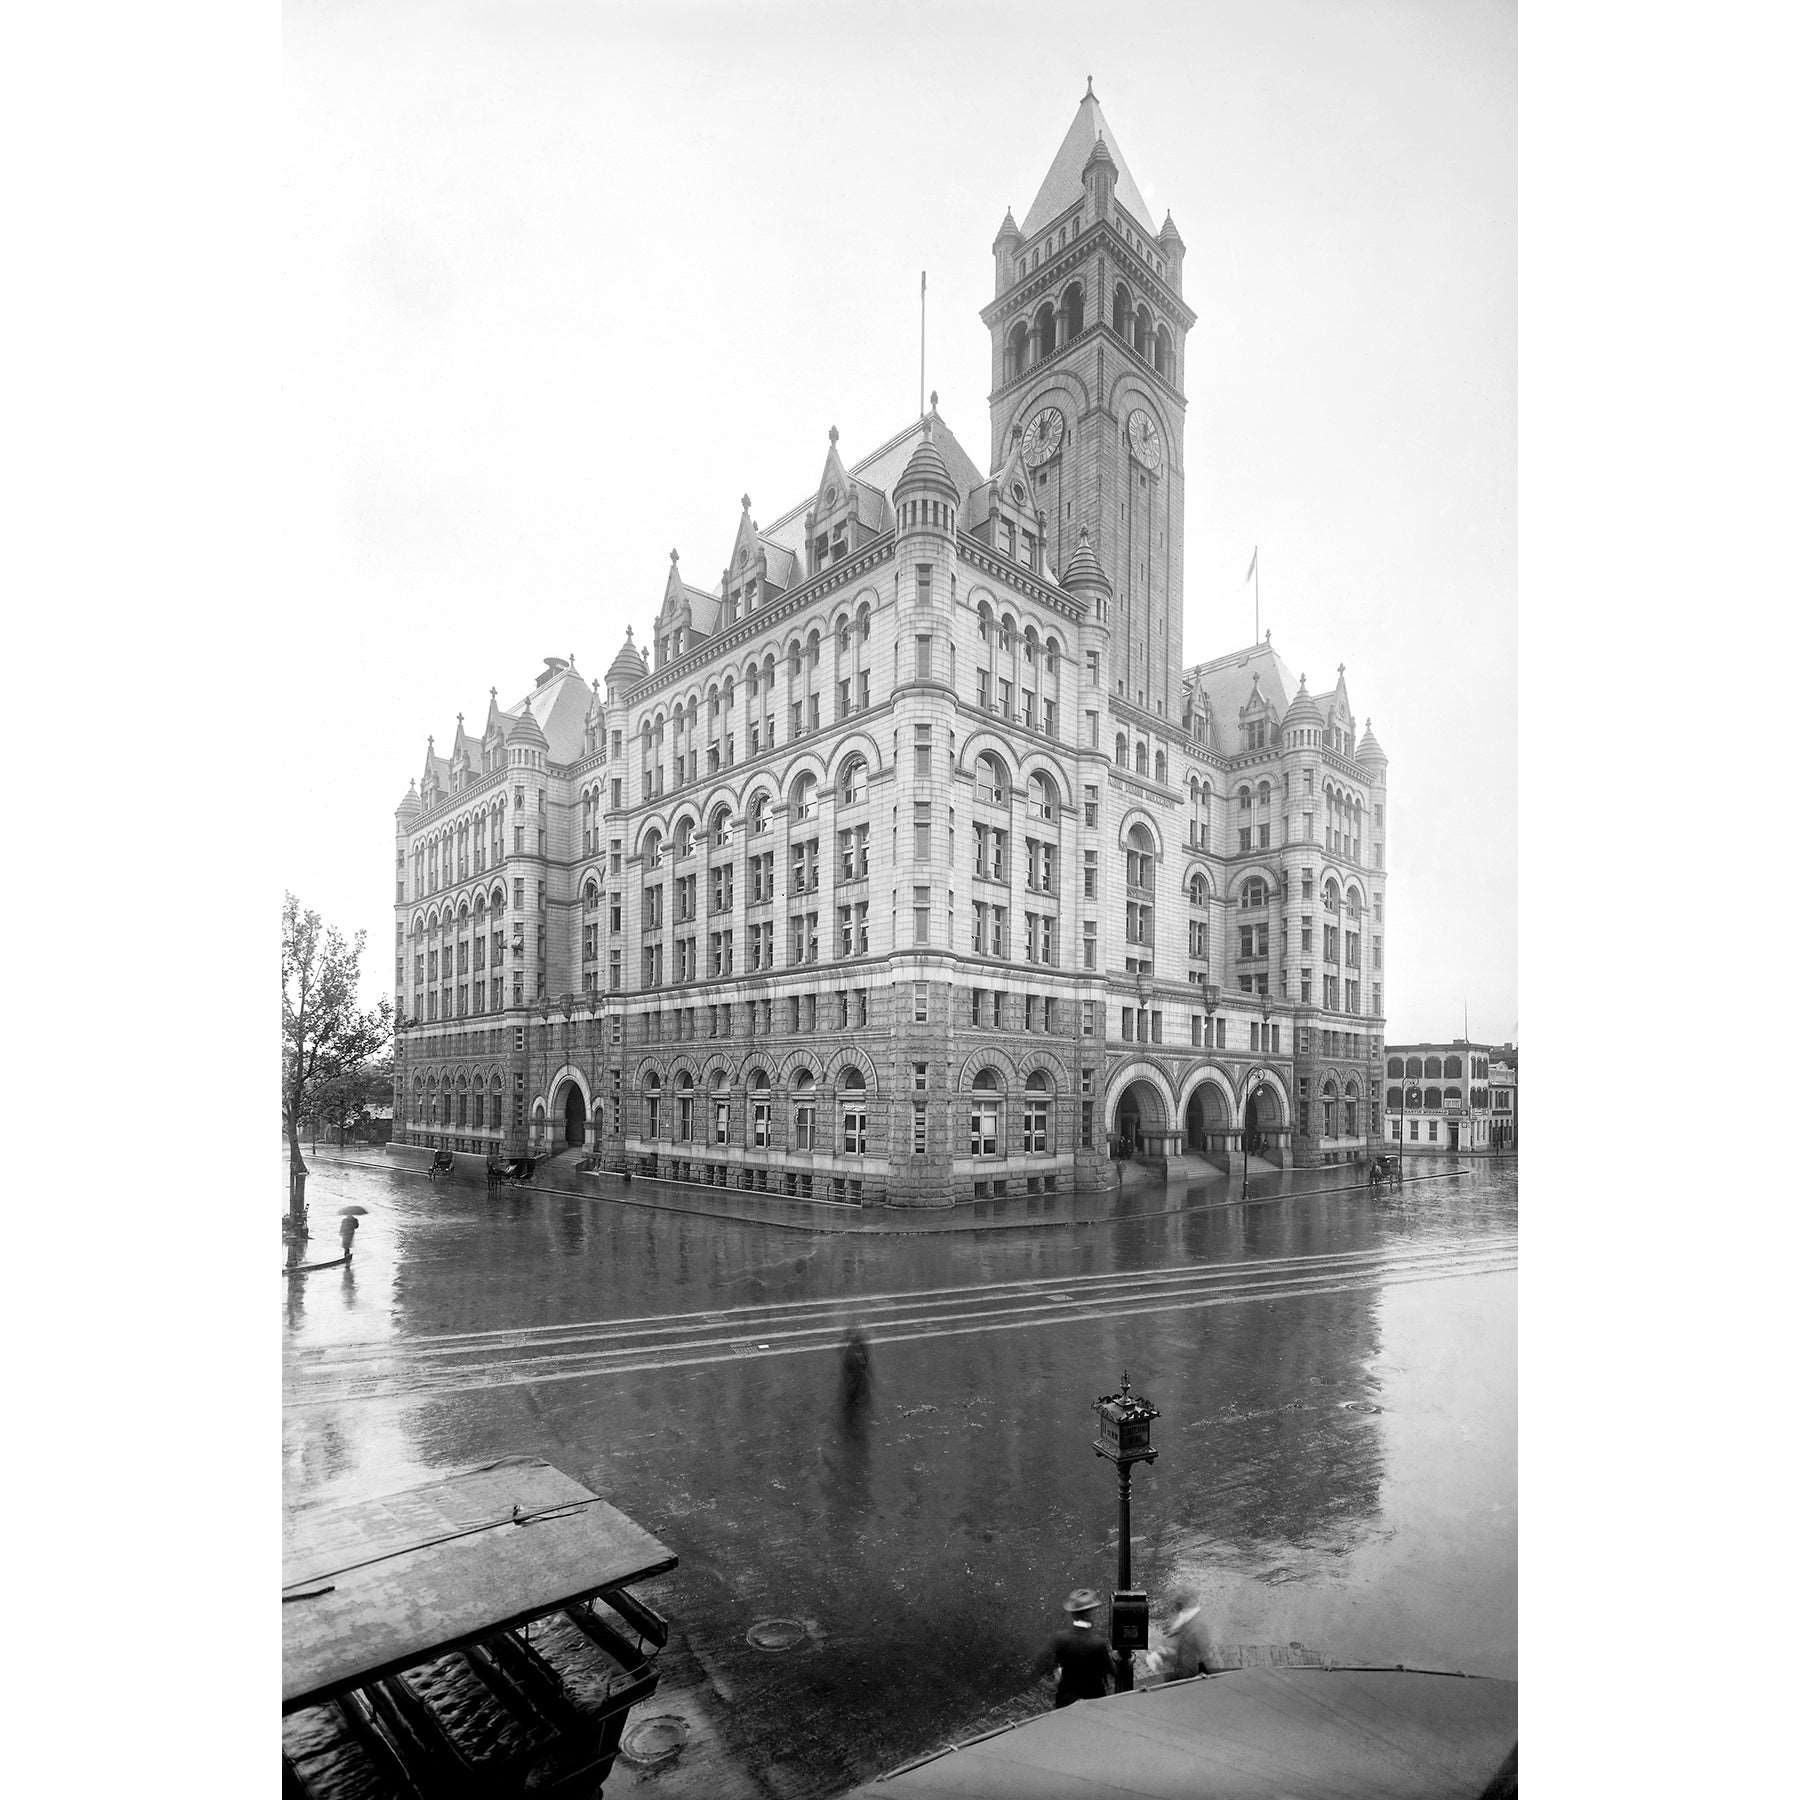 A black and white vintage photograph of the PO department building in Washington DC